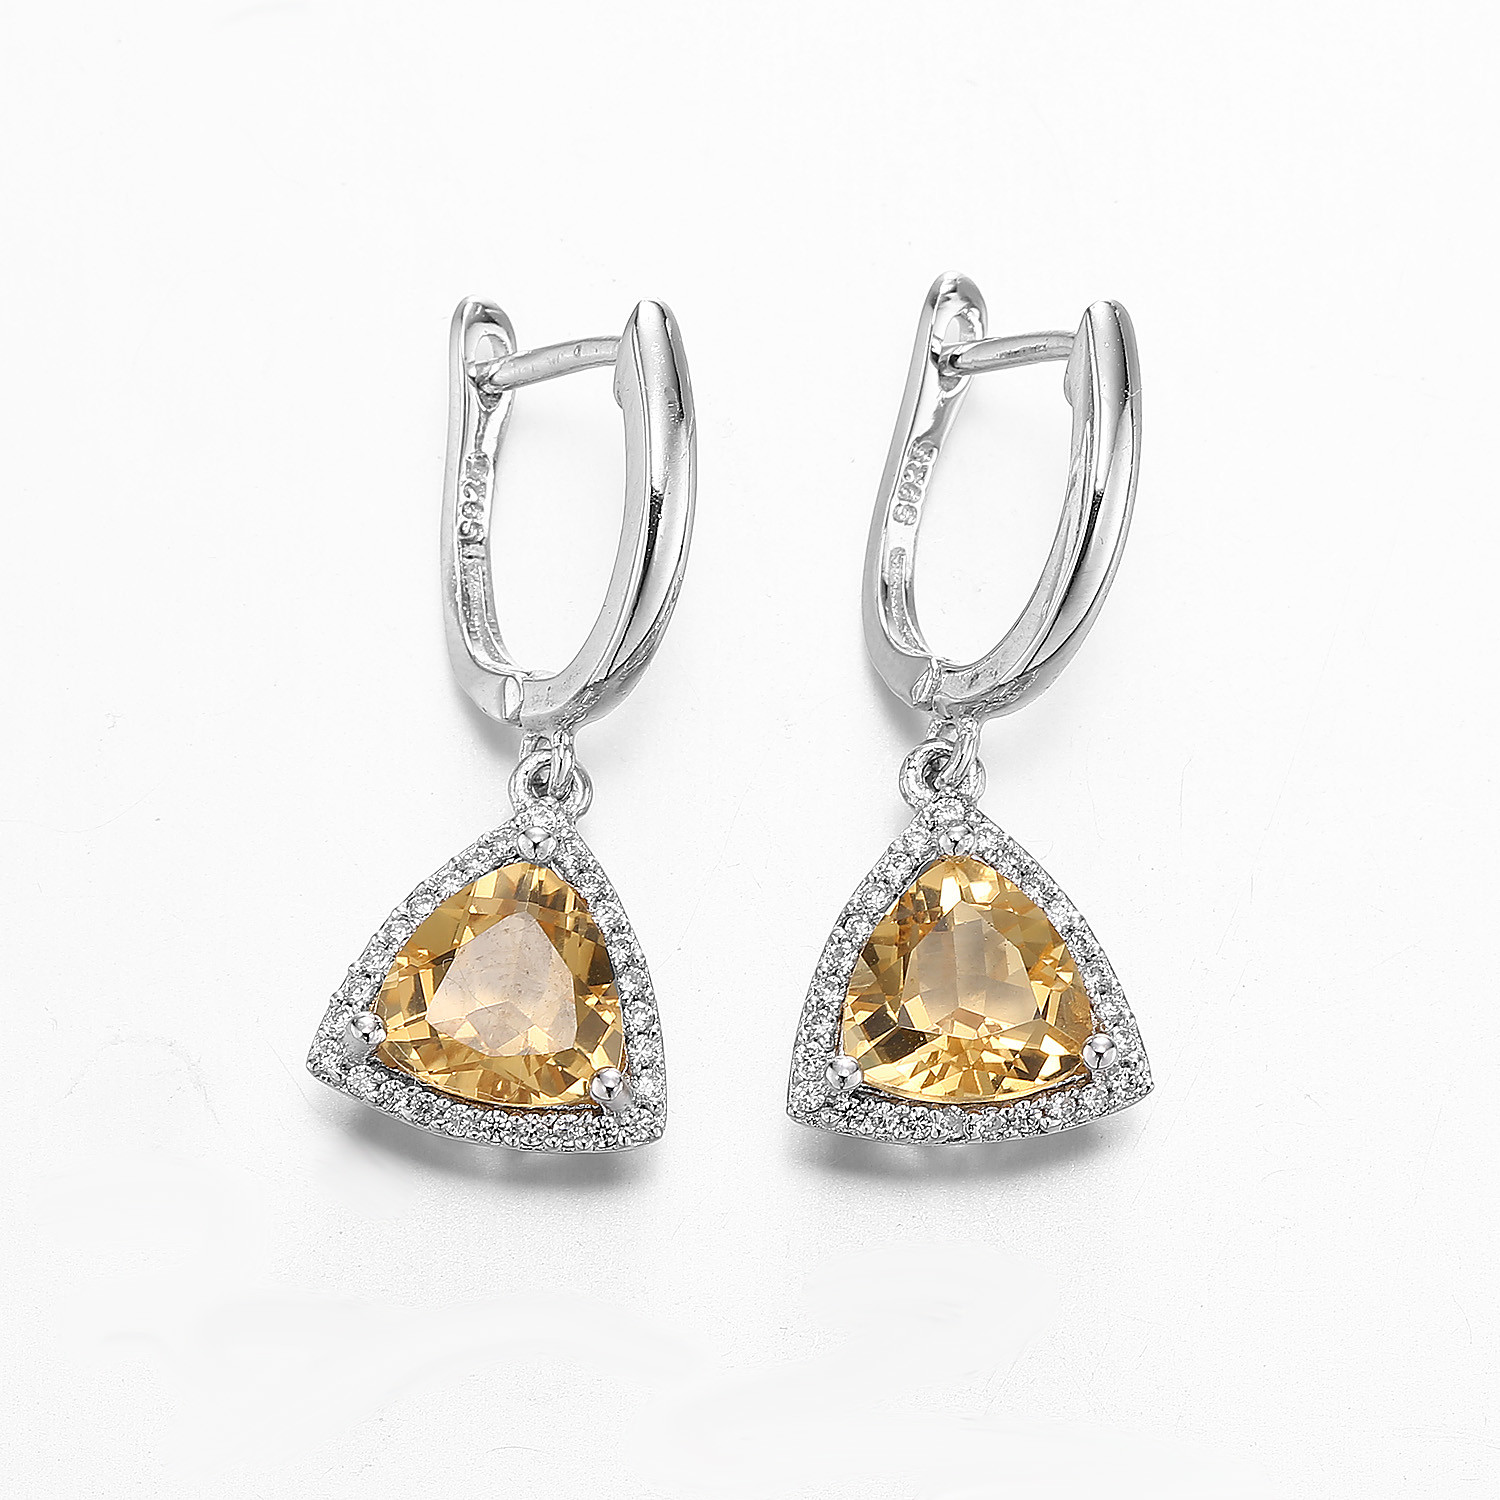 Wholesale 3.8g 925 Sterling Silver Gemstone Earrings Lemon Yellow Citrine Topaz from china suppliers